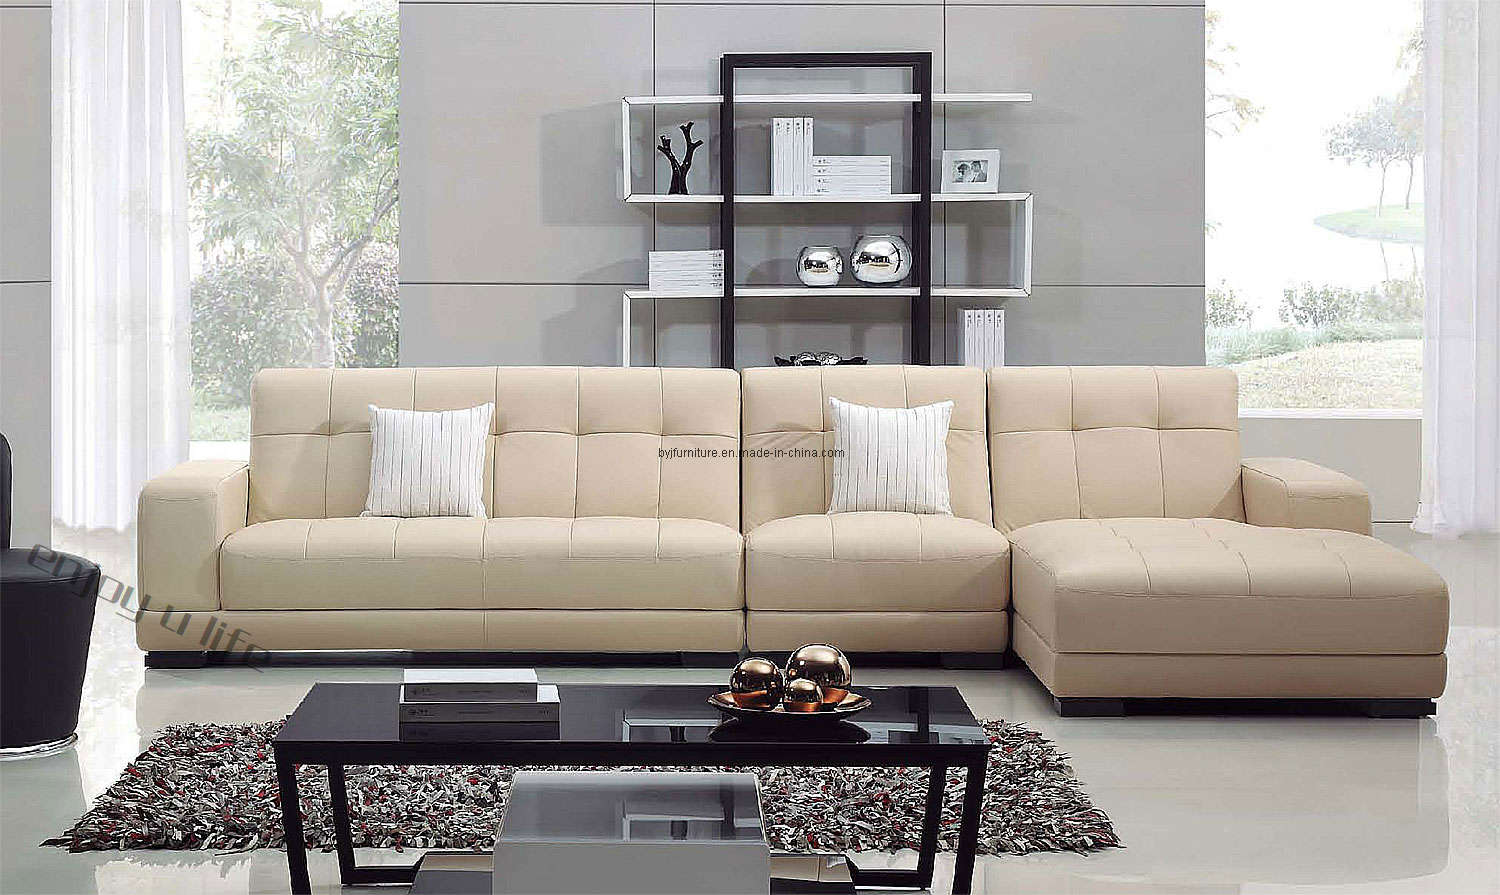 Get the full privilege of bed come sofa
for your living room